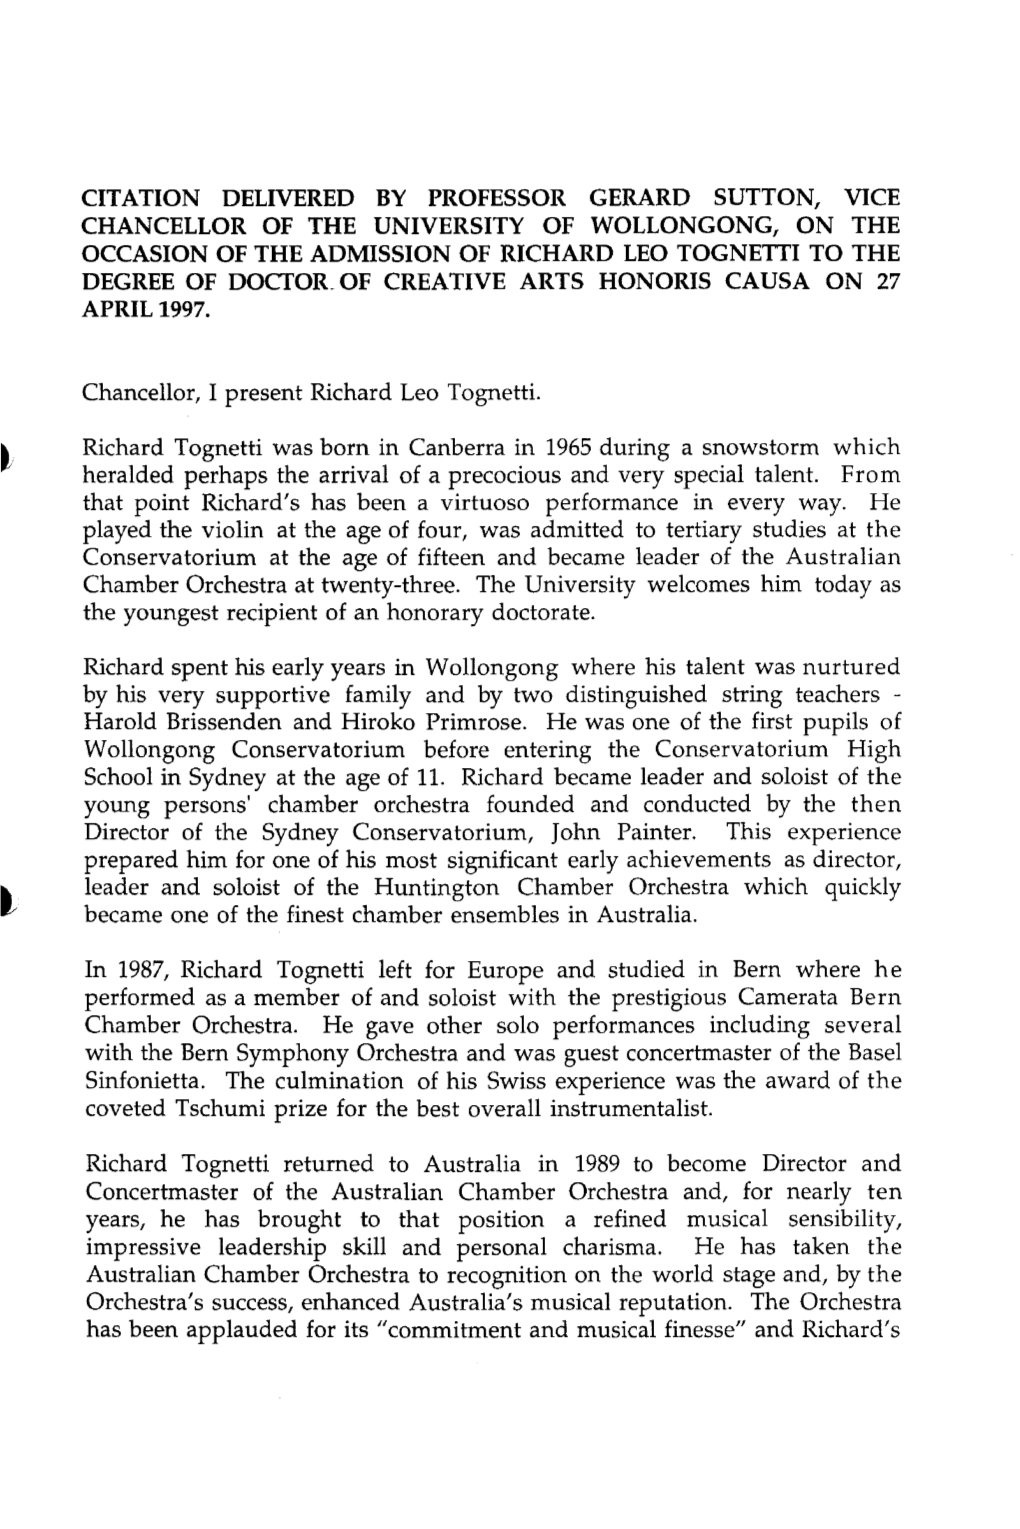 Richard Leo Tognetti to the Degree of Docior of Creative Arts Honoris Causa on 27 April 1997